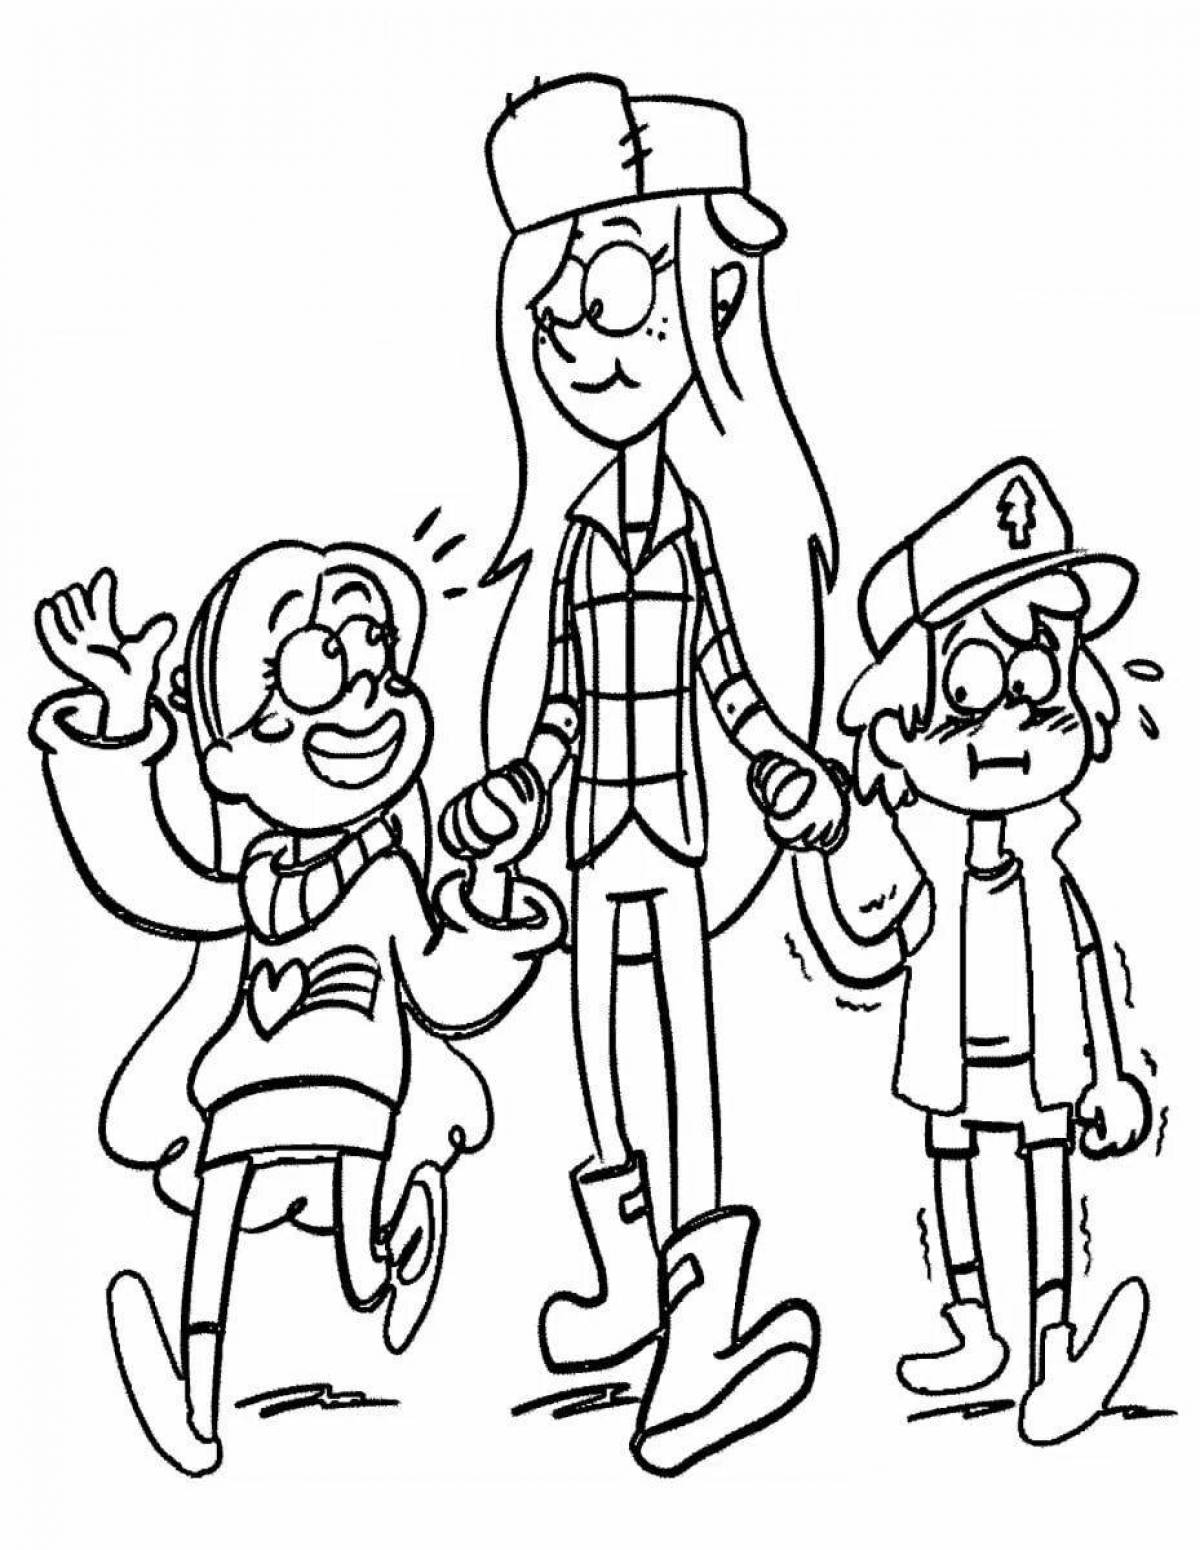 Playful family of gravity falls